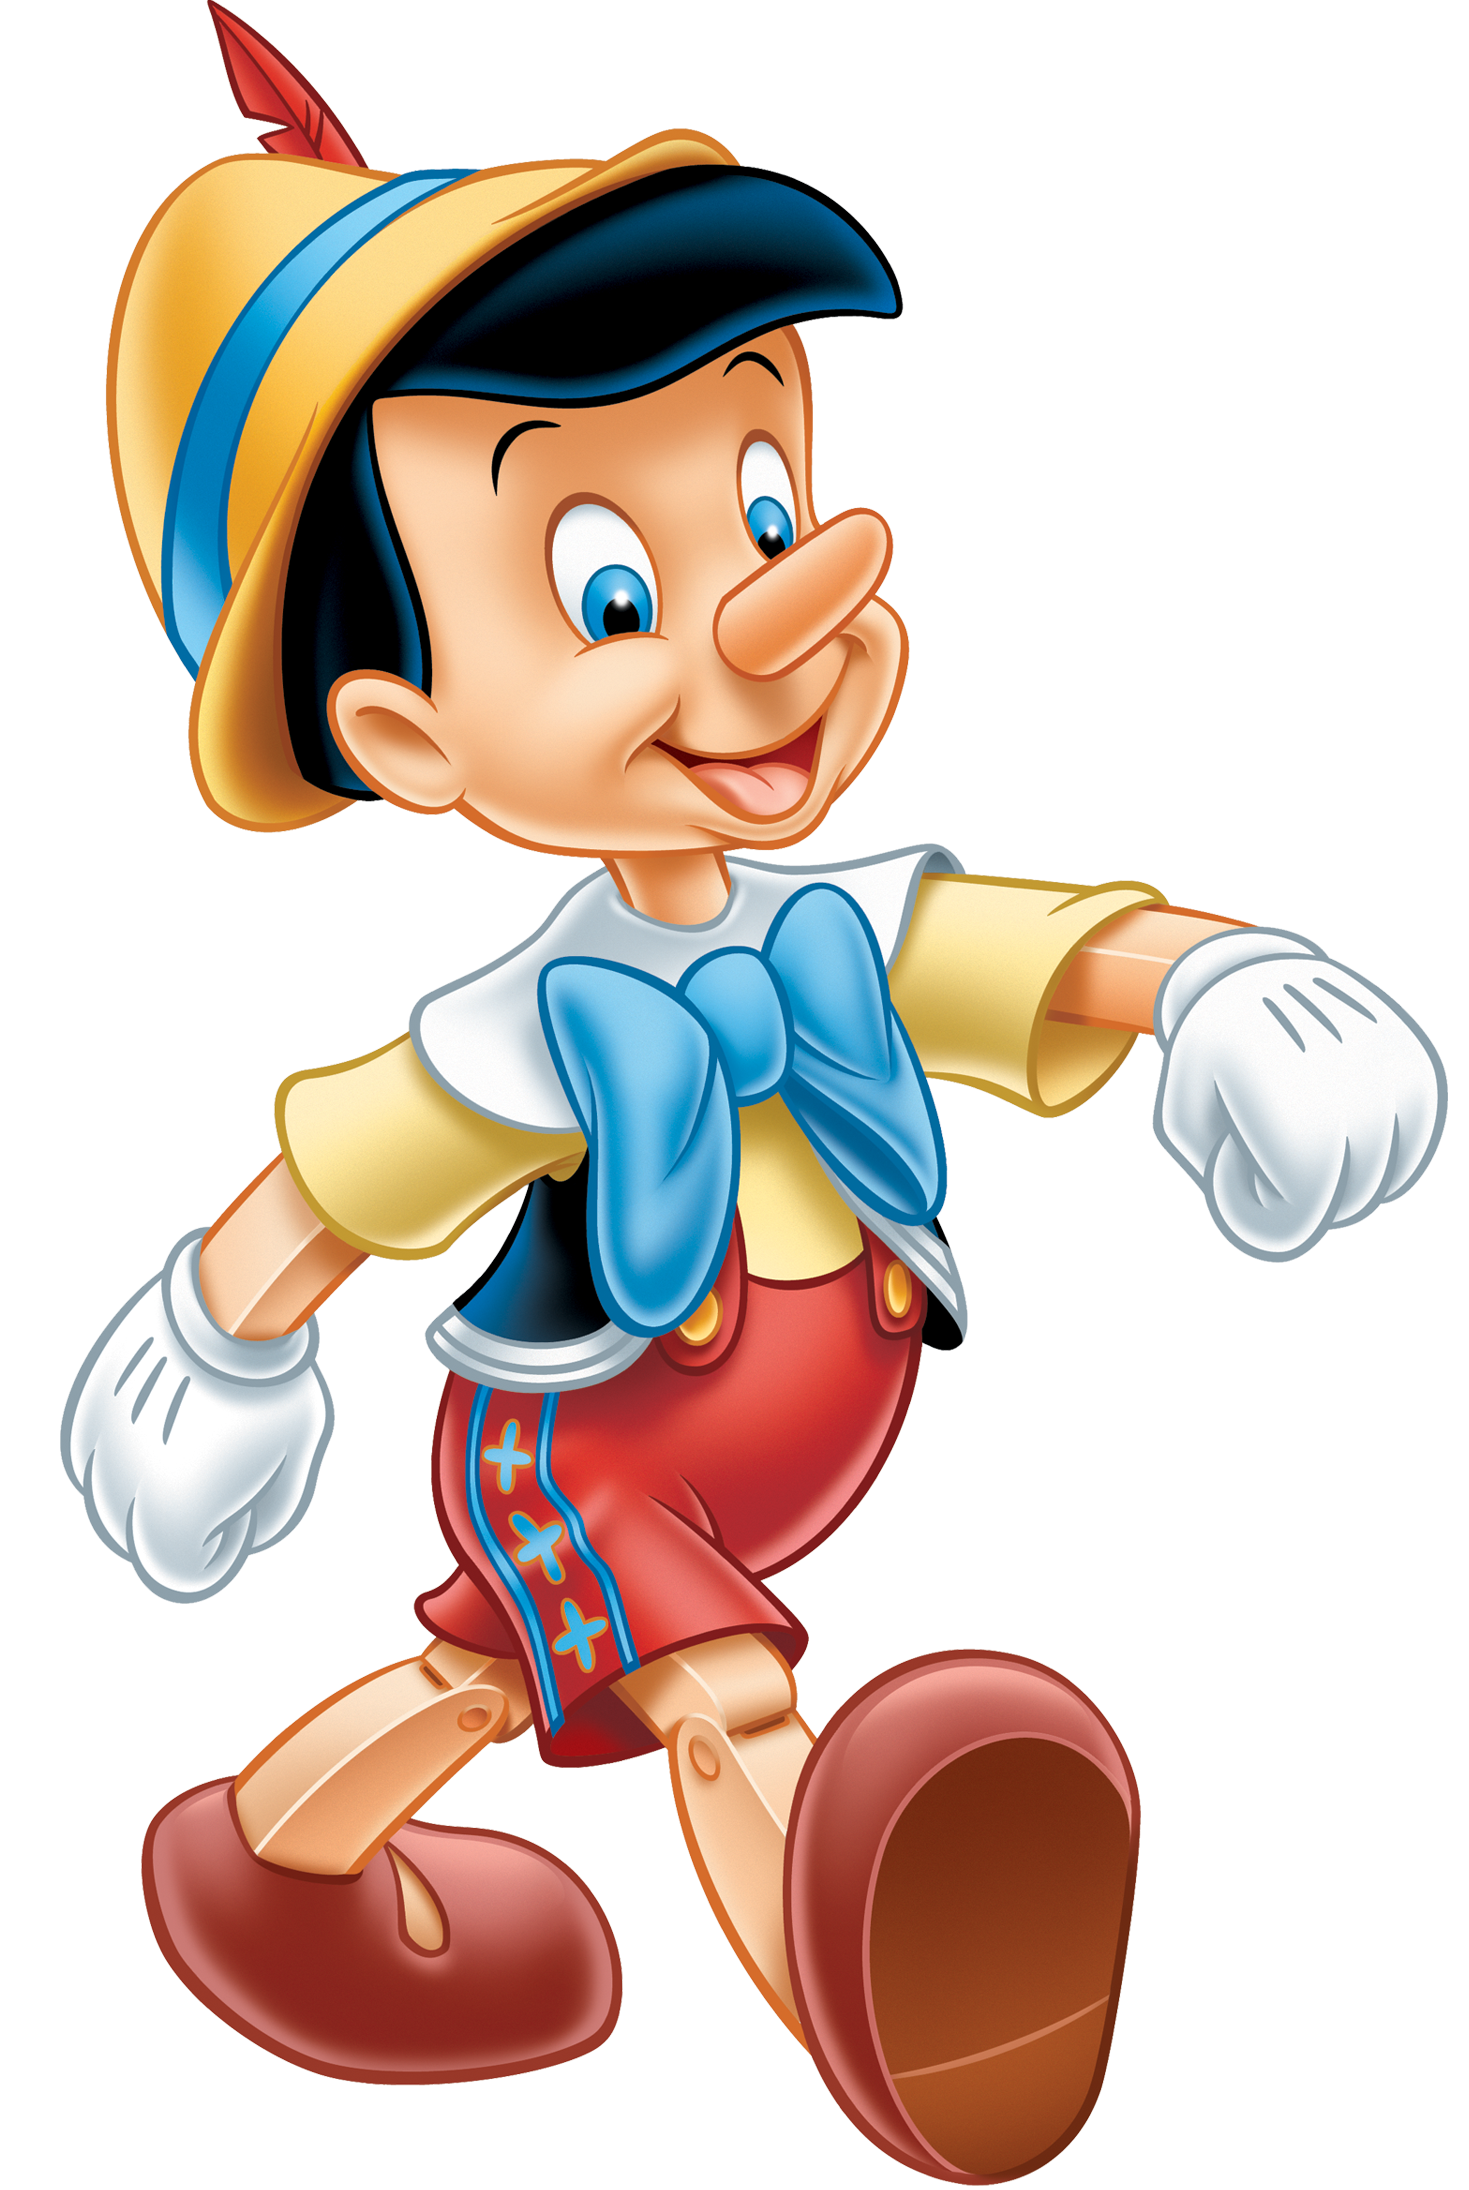 Pinocchio.png, PNG Pinocchio - Free PNG